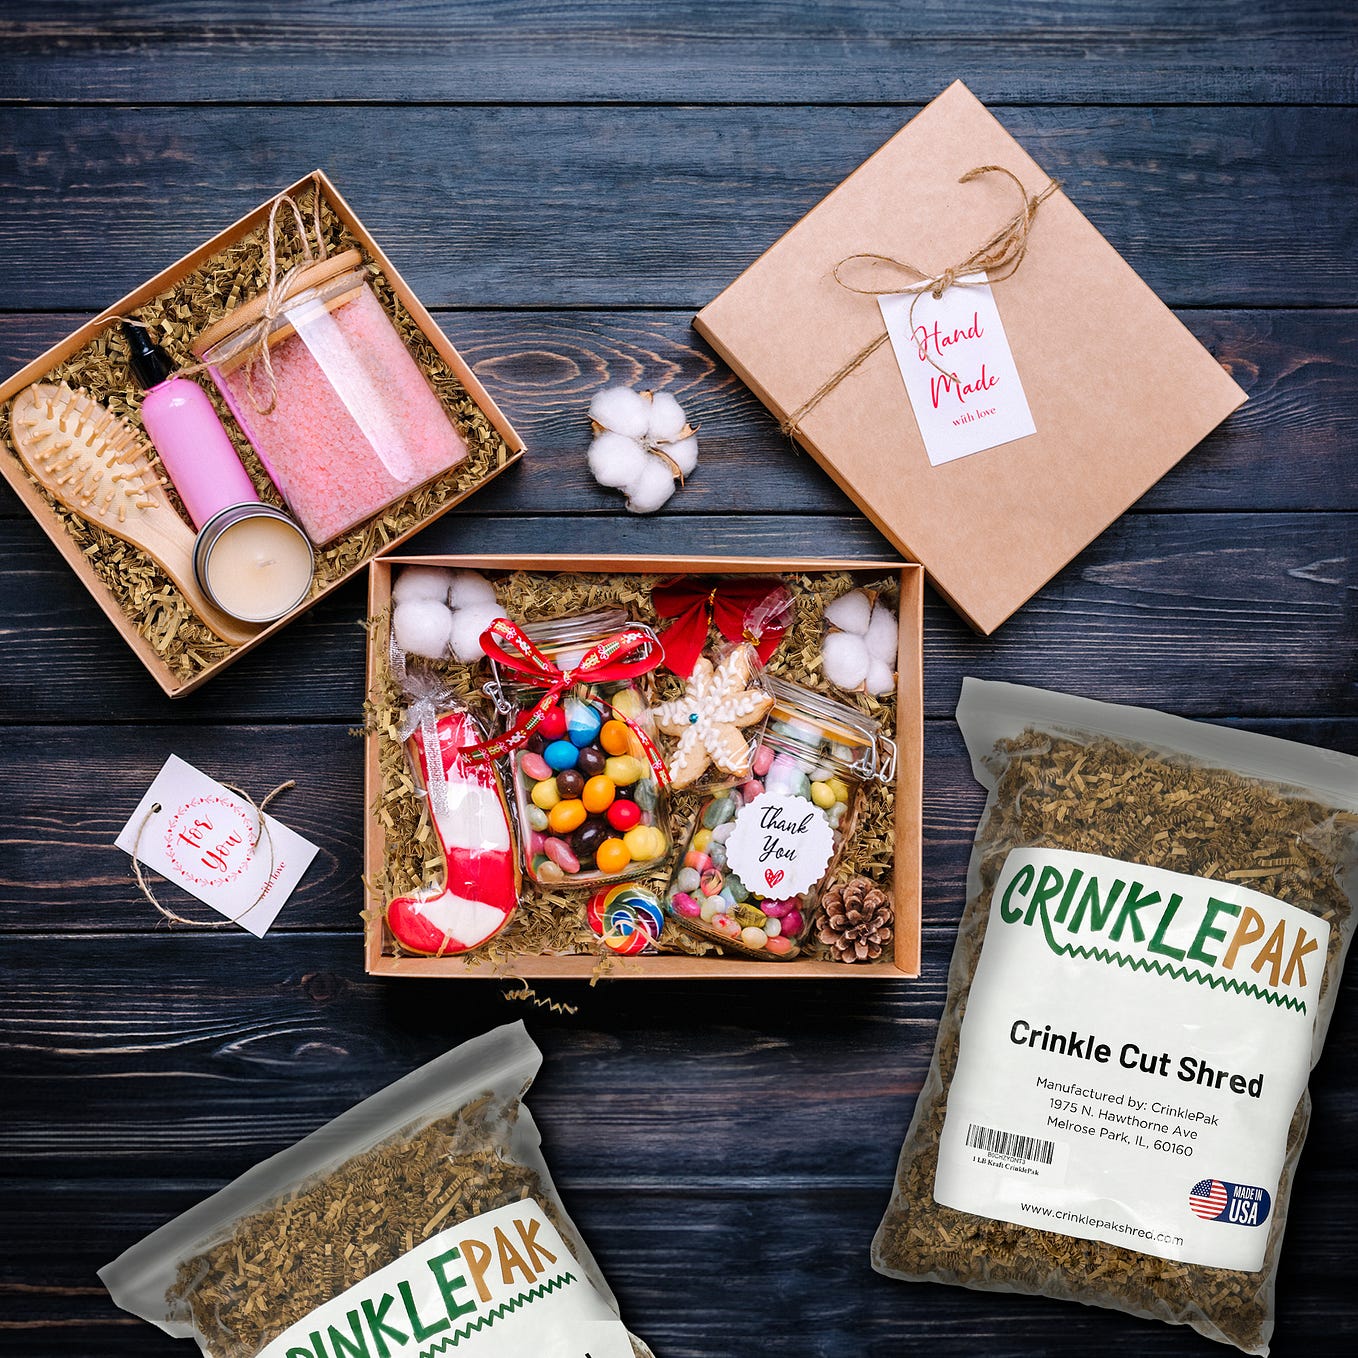 Monster Crinkle is an environmentally-friendly shredded paper packing  peanut alternative with the same drop protection, but with a more compact